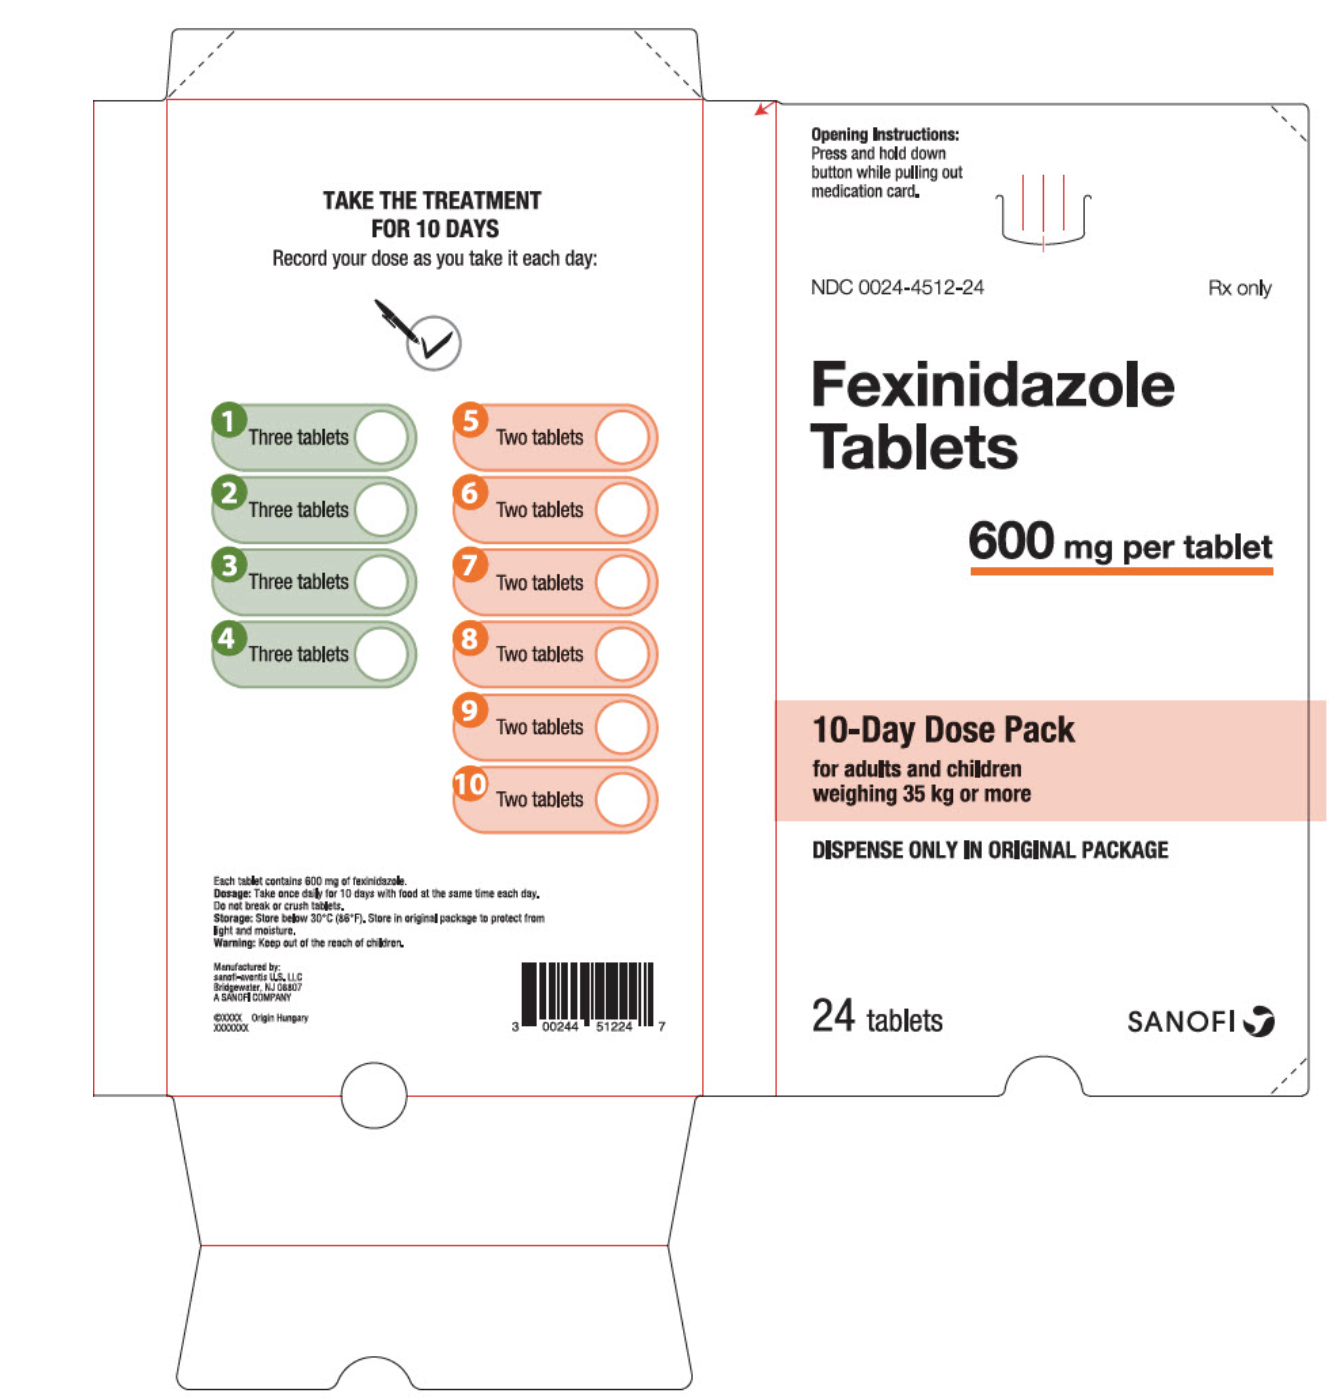 File:Fexinidazole Packaging Label.png